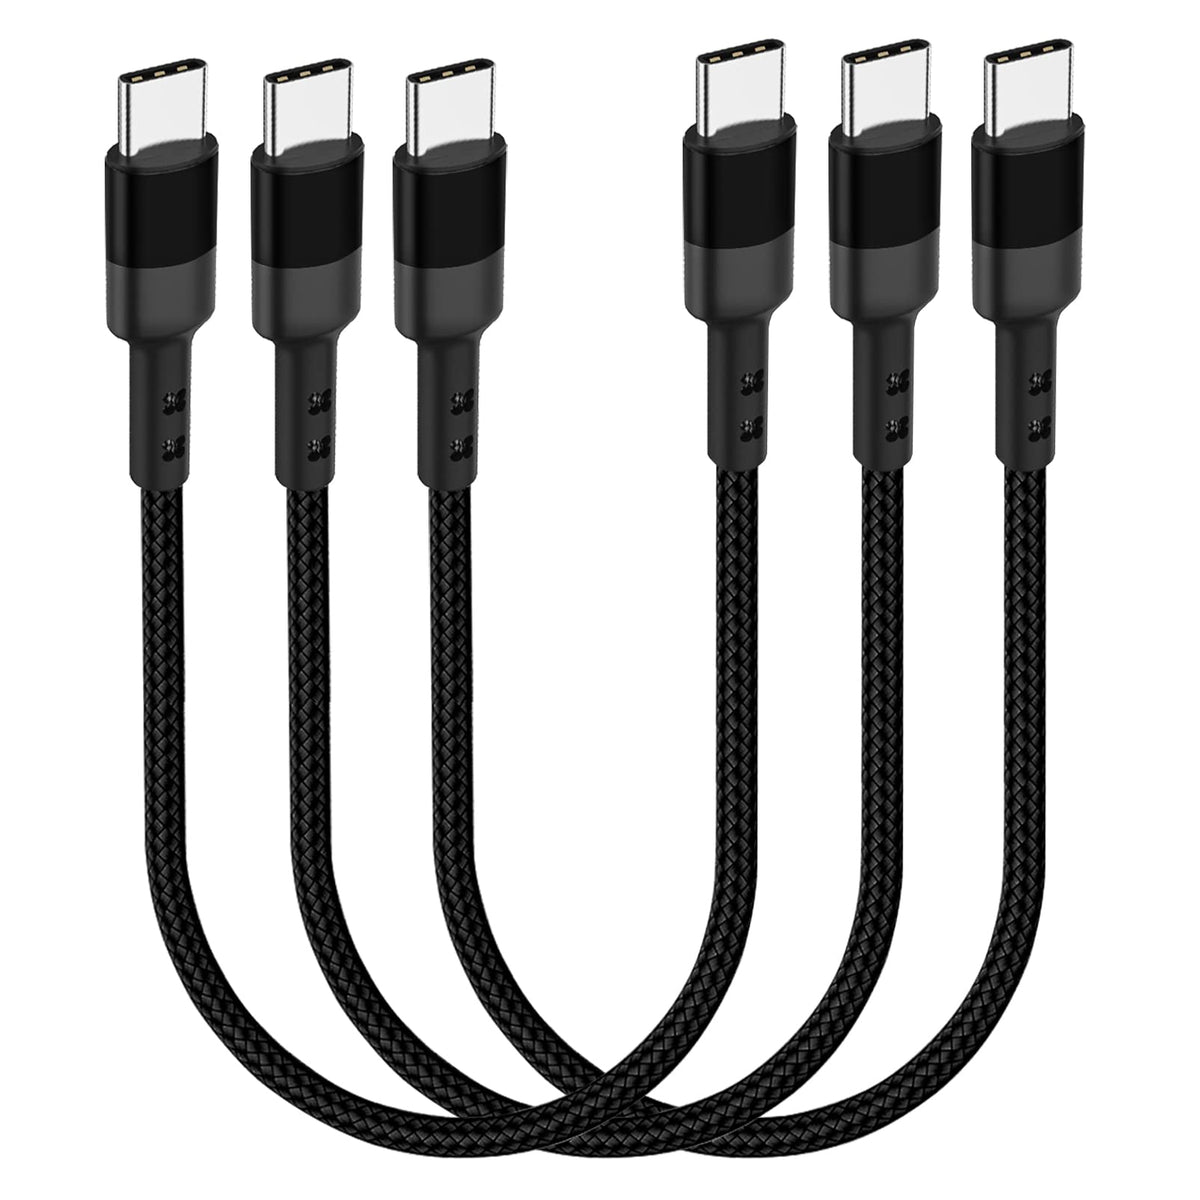 30cm USB C to USB C Cable, 3-Pack 12 inch 20V 3A Type C PD Fast Charging Cord Compatible with Samsung Galaxy S20/S9 Ultra Note 20, Pixel 4/3 XL